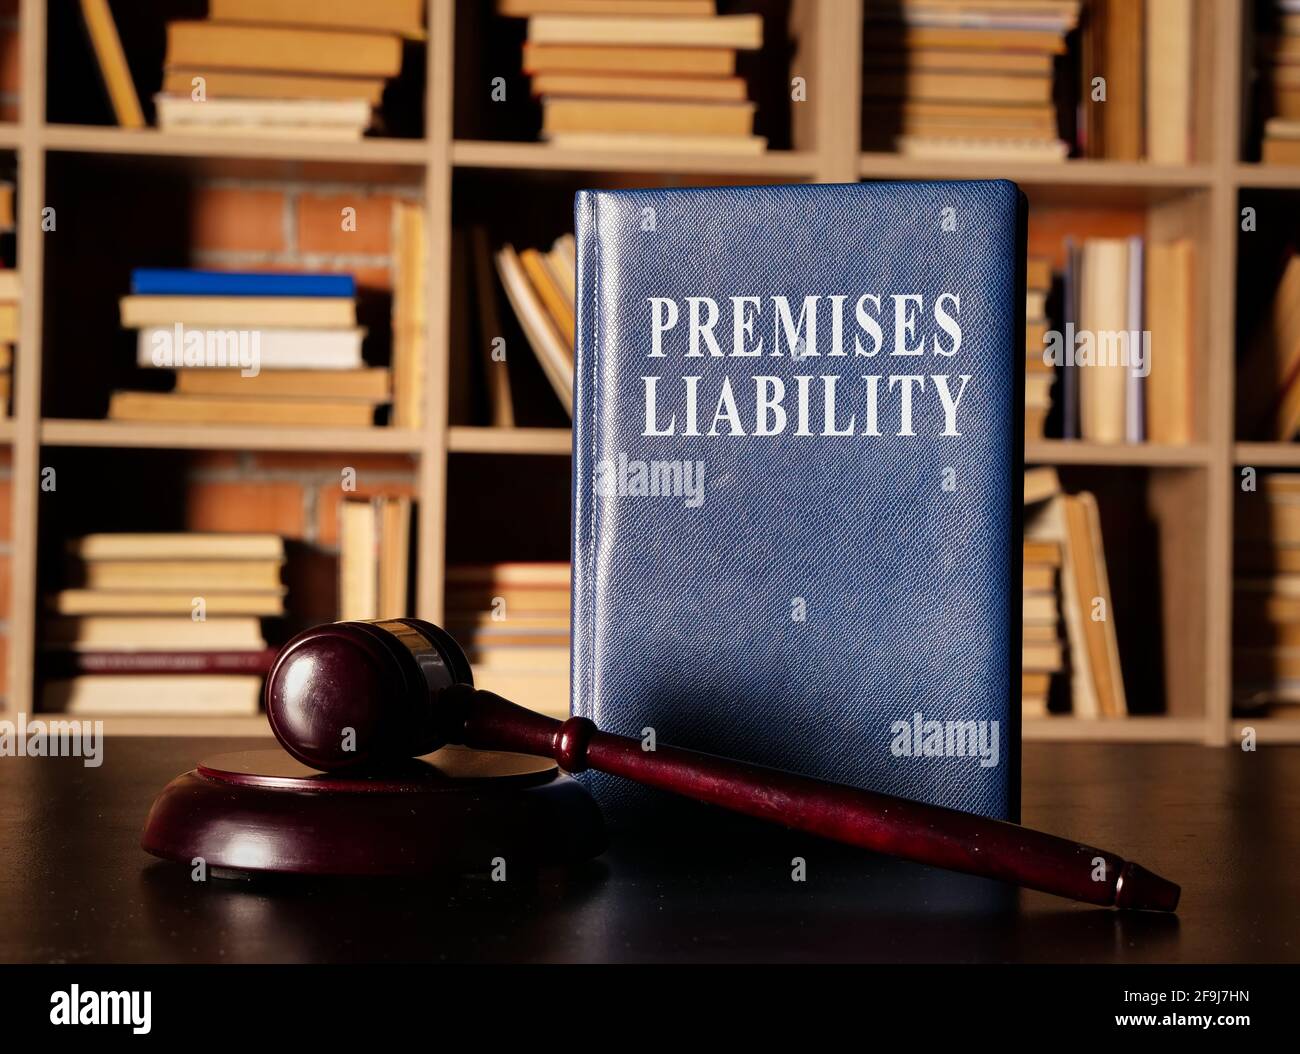 Premises Liability book with a court hummer. Stock Photo